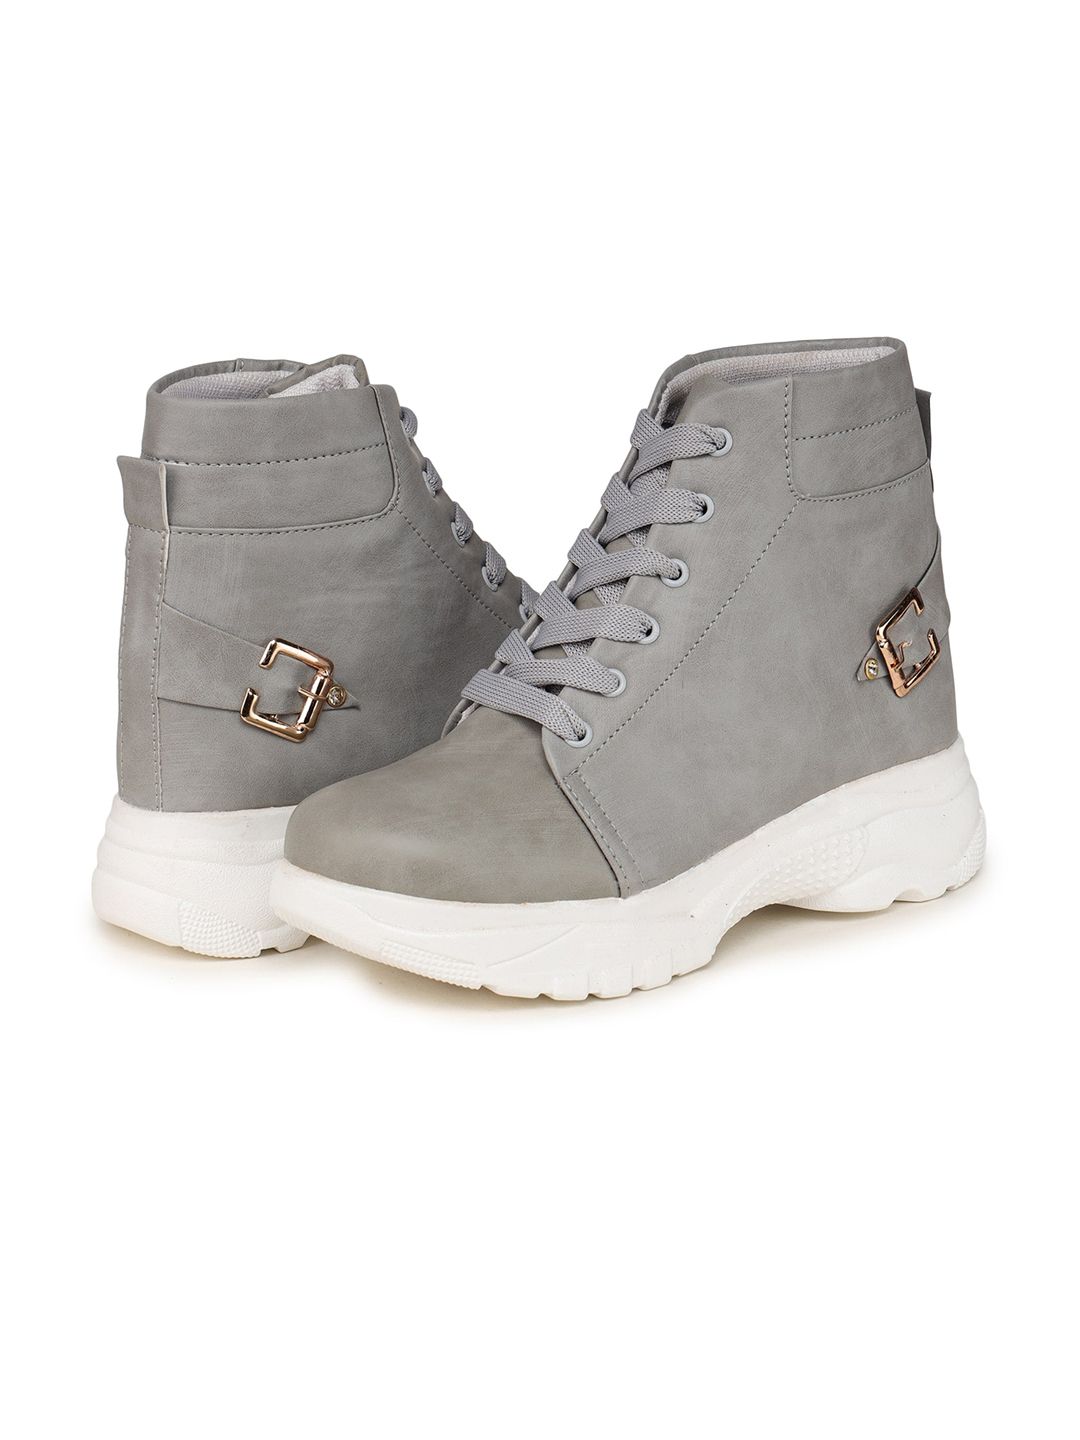 BOOTCO Women Grey Solid High-Top Flat Boots Price in India